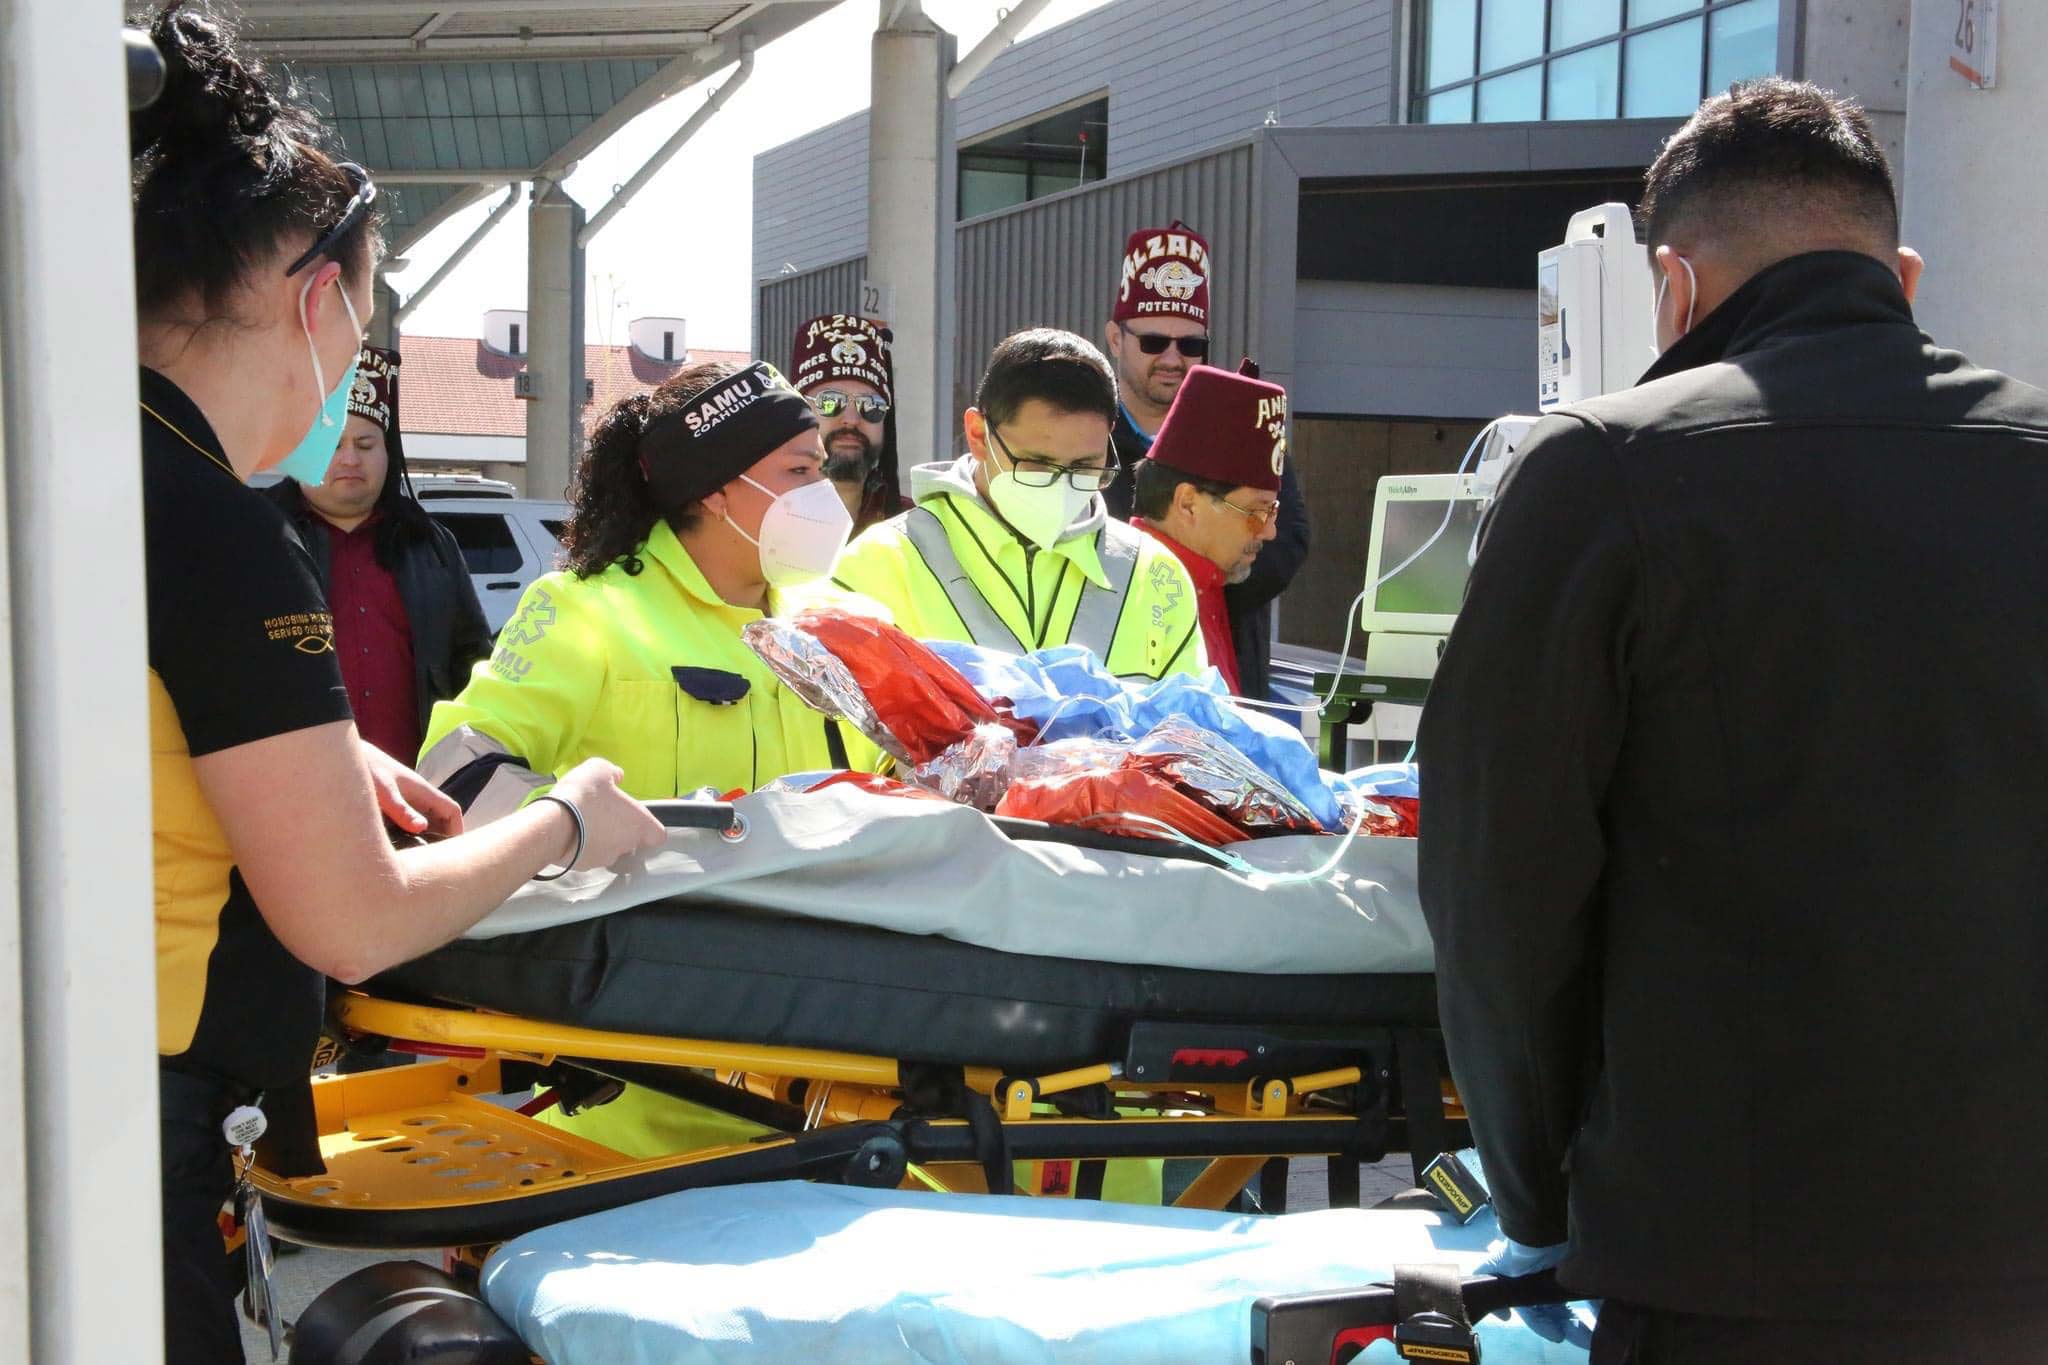 medical personnel, Shriners and patient on gurney